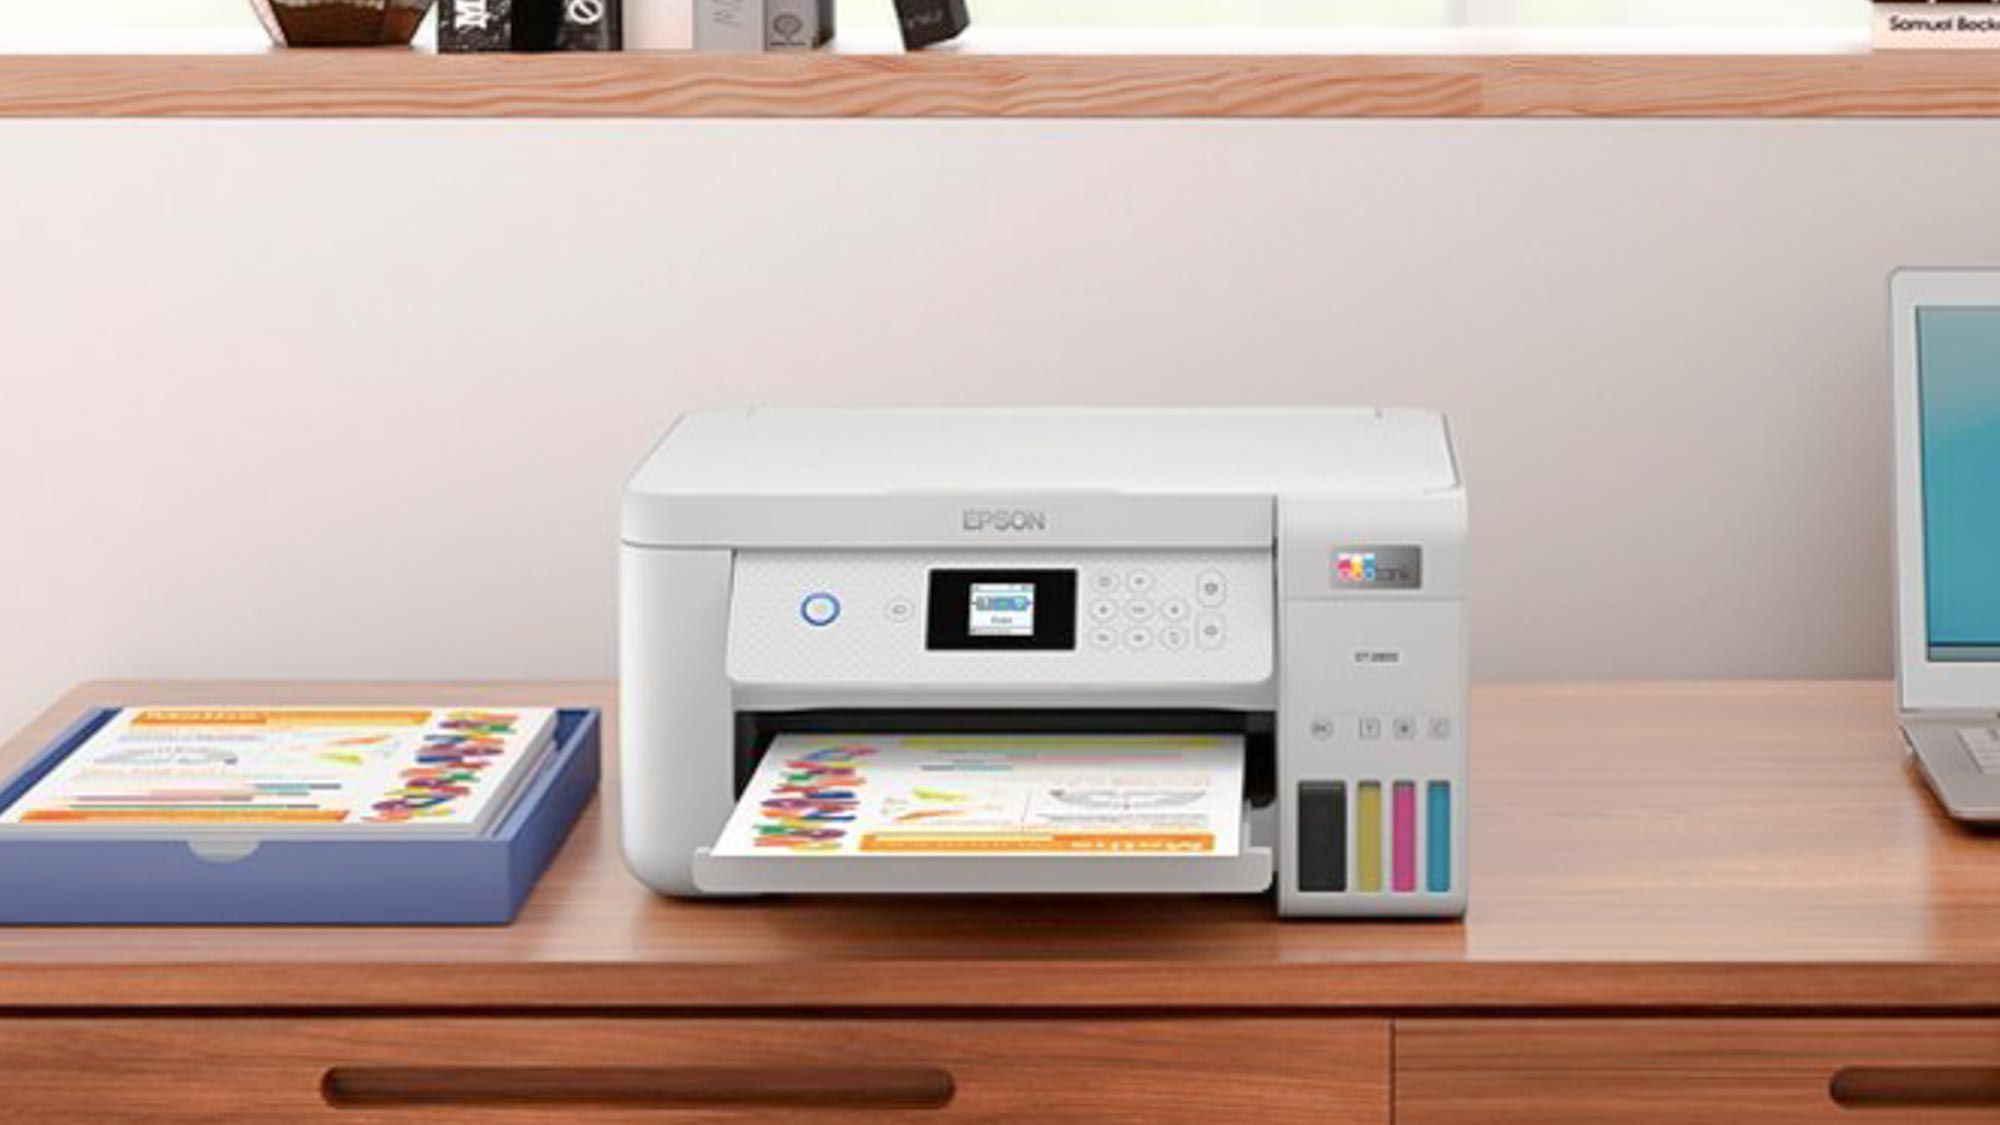 Epson EcoTank ET-2820 All-in-One Wireless Inkjet Printer - Product Overview  